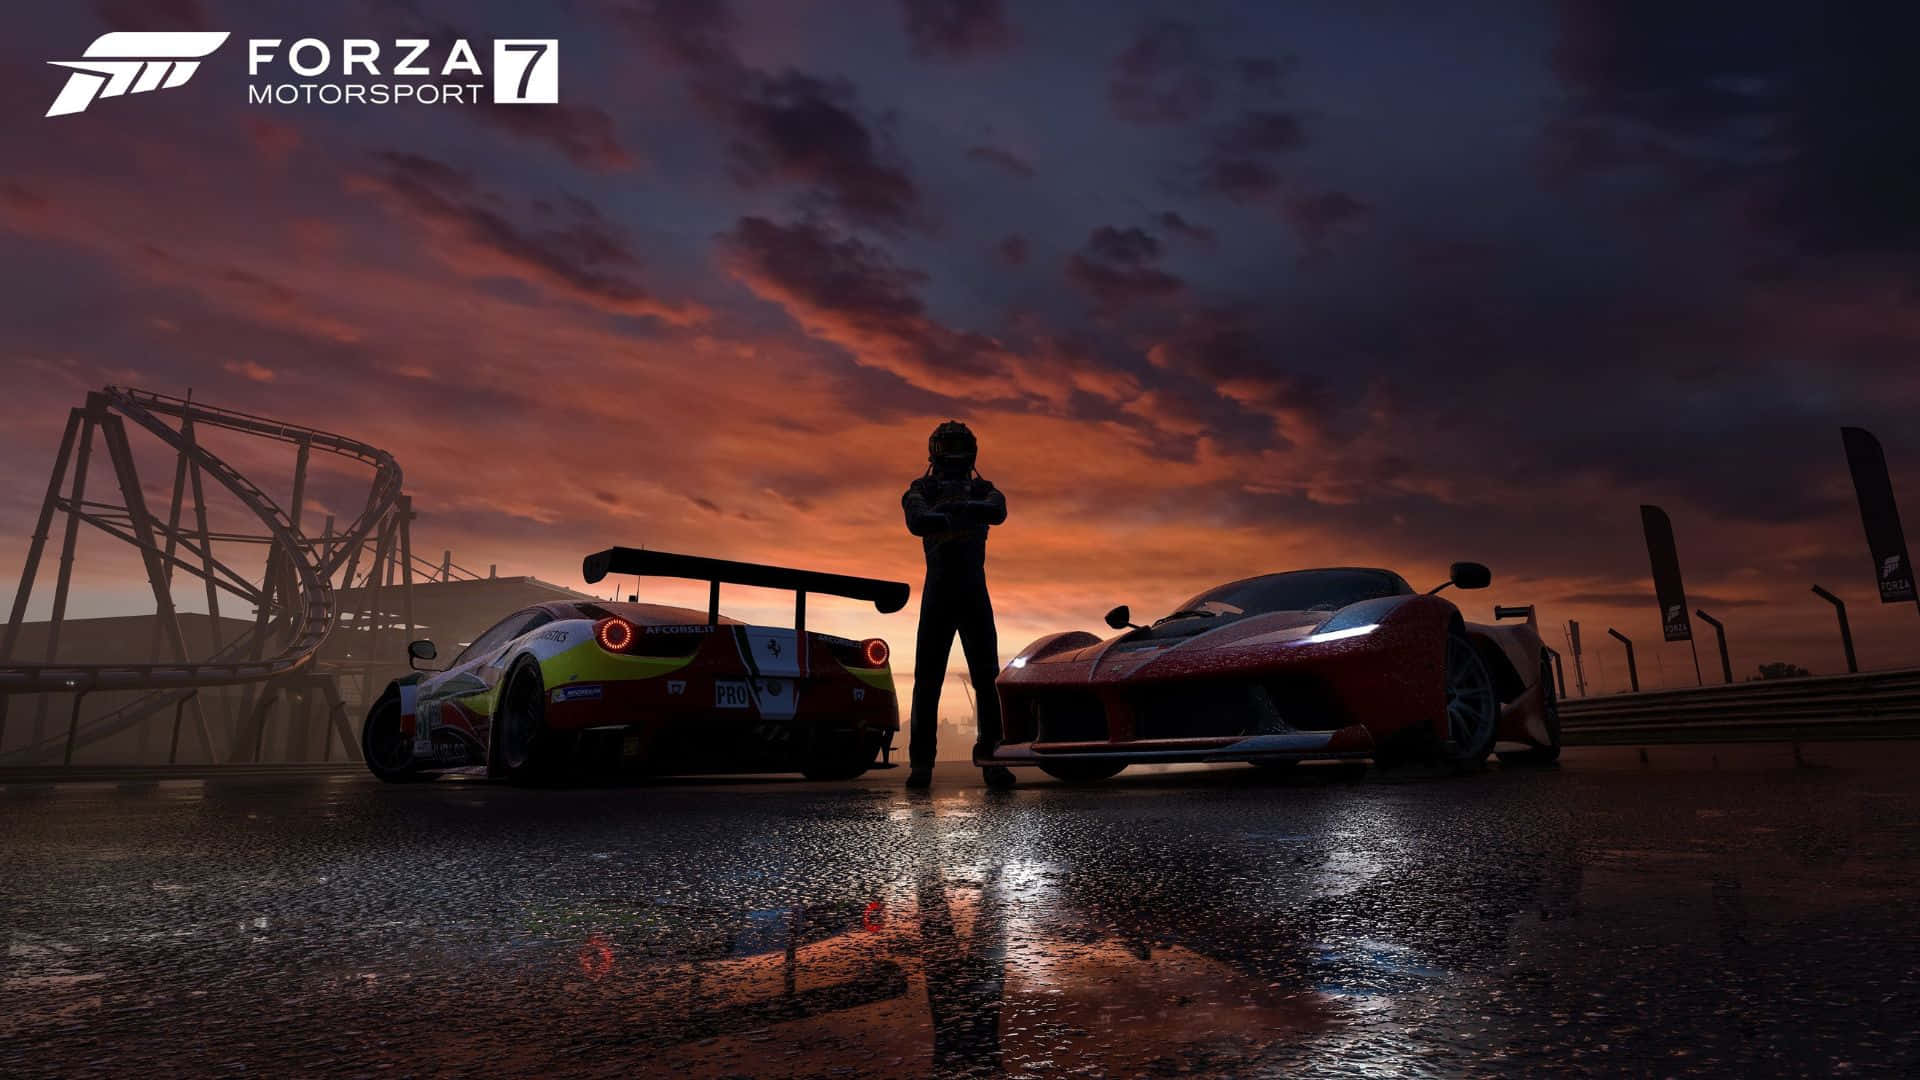 Hd Forza Motorsport 7 Background At The Side Of Road Wallpaper